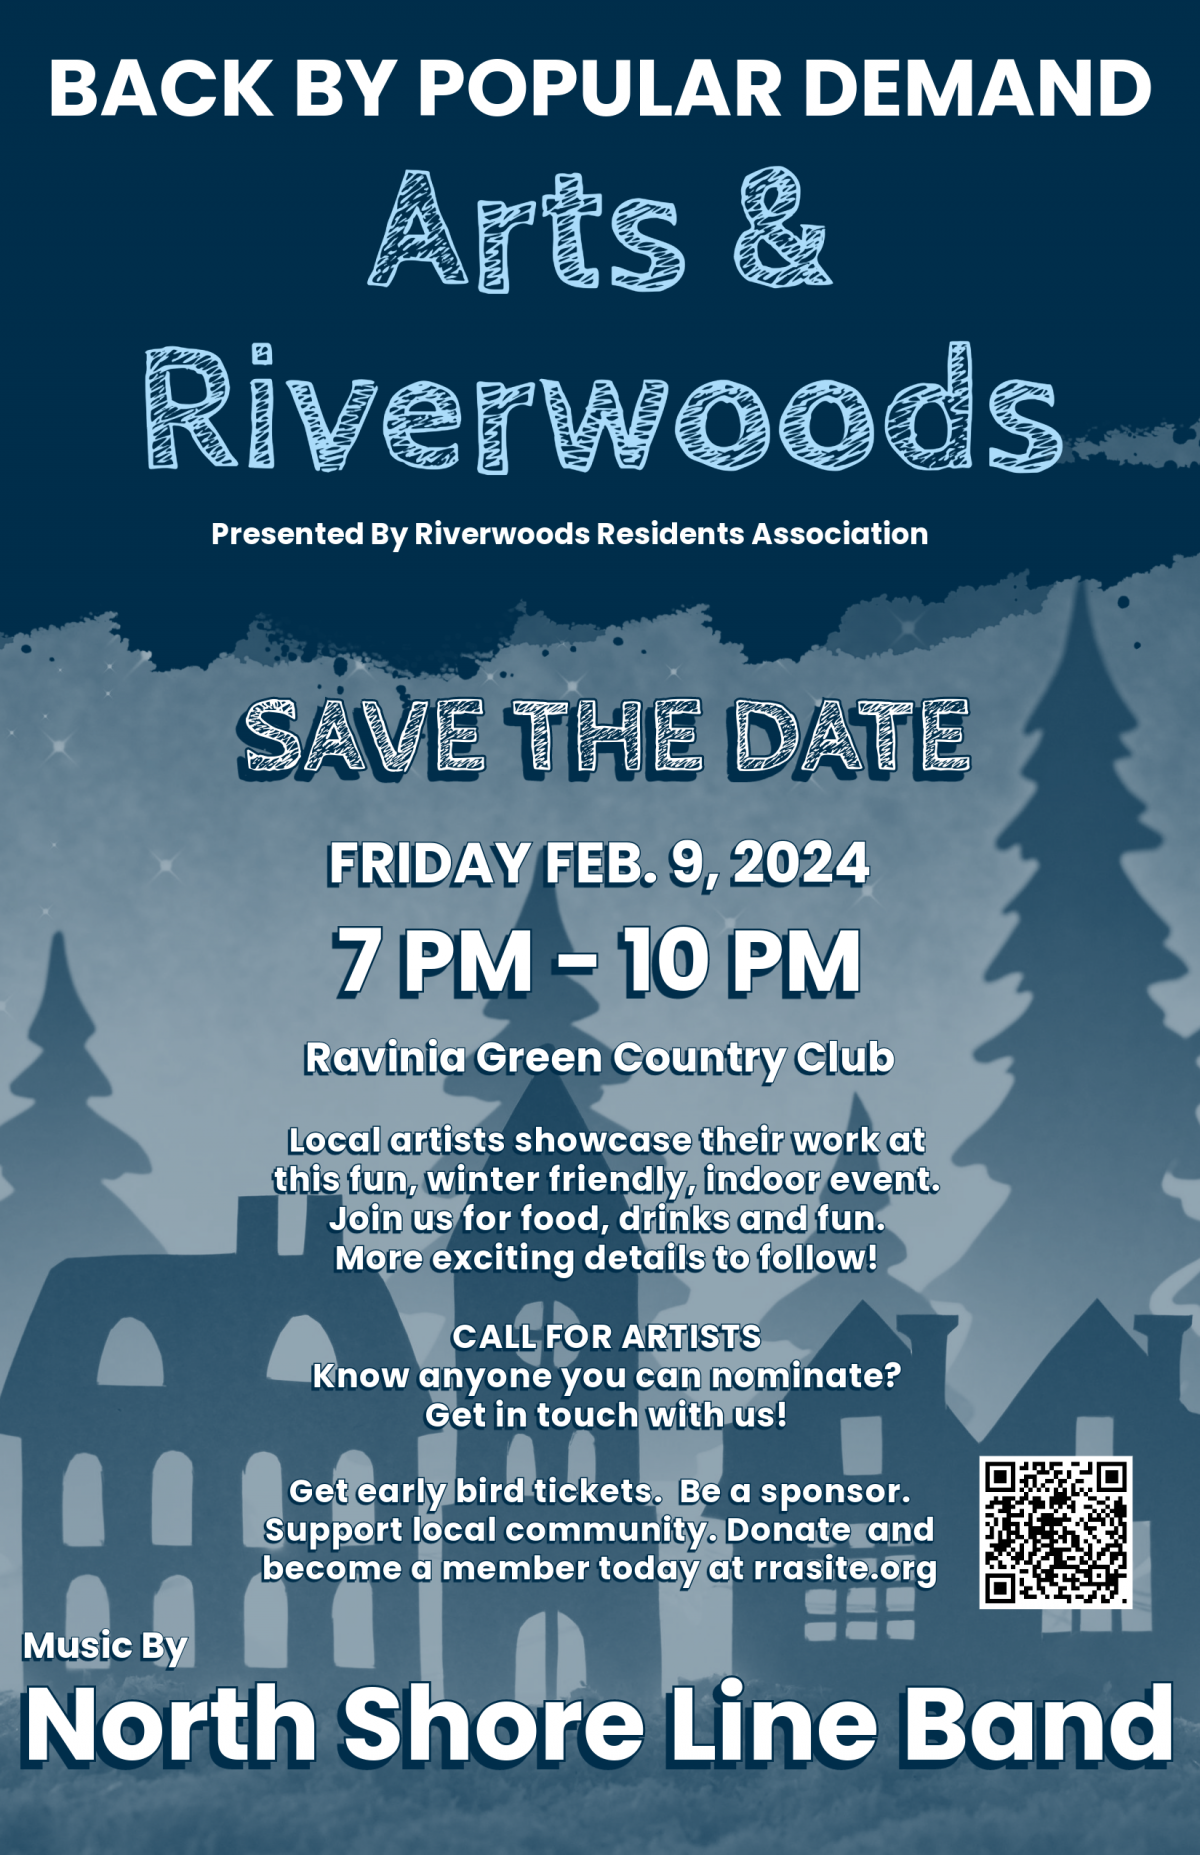 Arts and Riverwoods Flyer | Save the Date - Friday, Feb 9, 2024